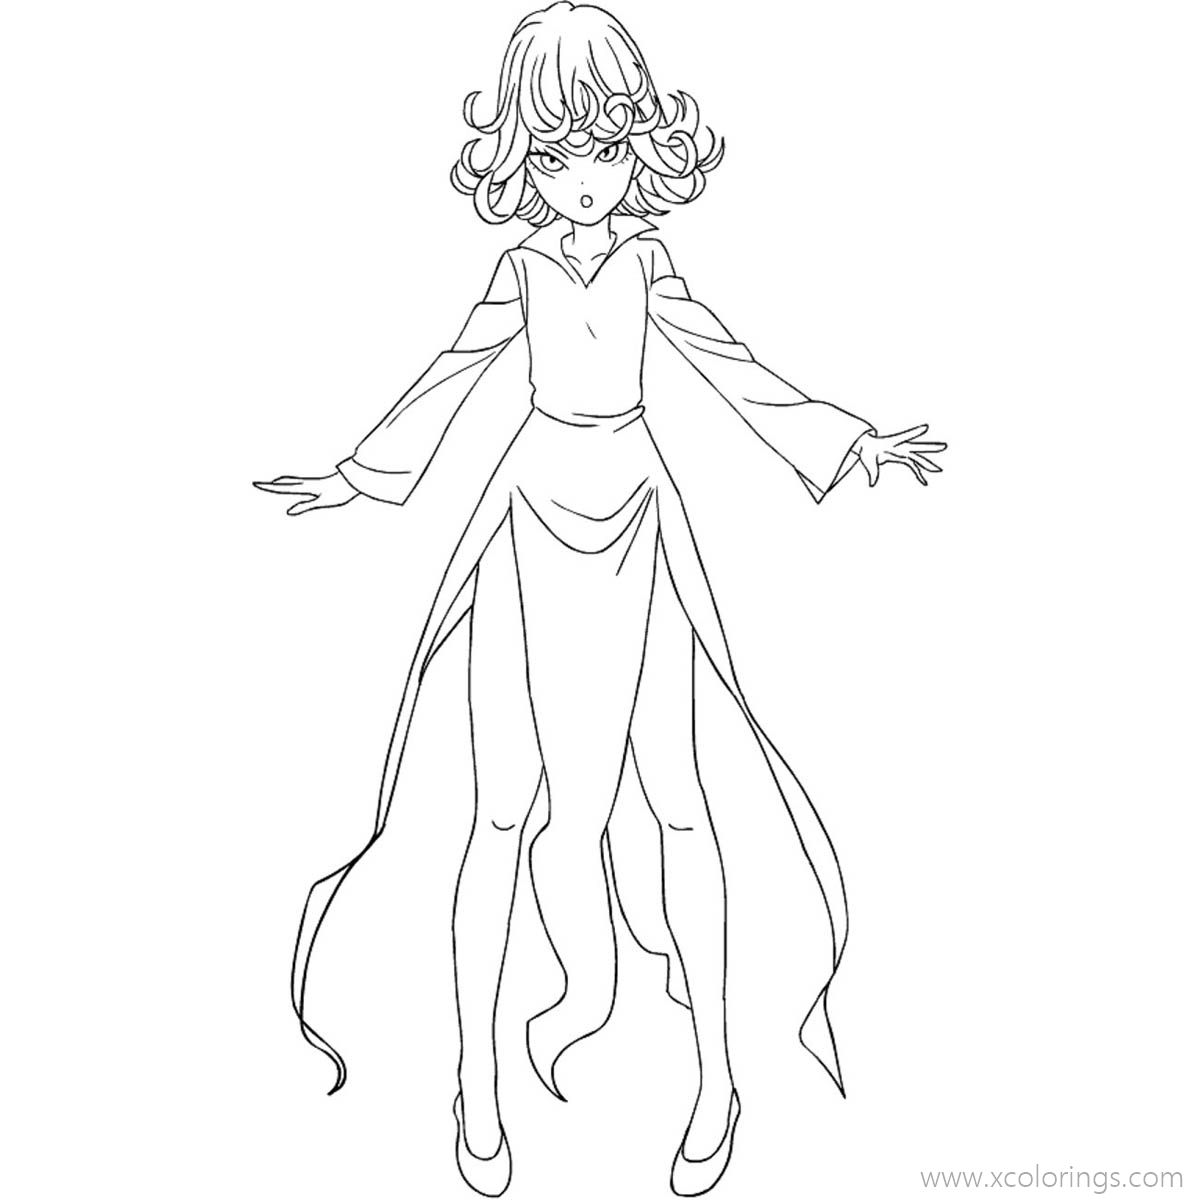 Free Tatsumaki from One Punch Man Coloring Pages printable